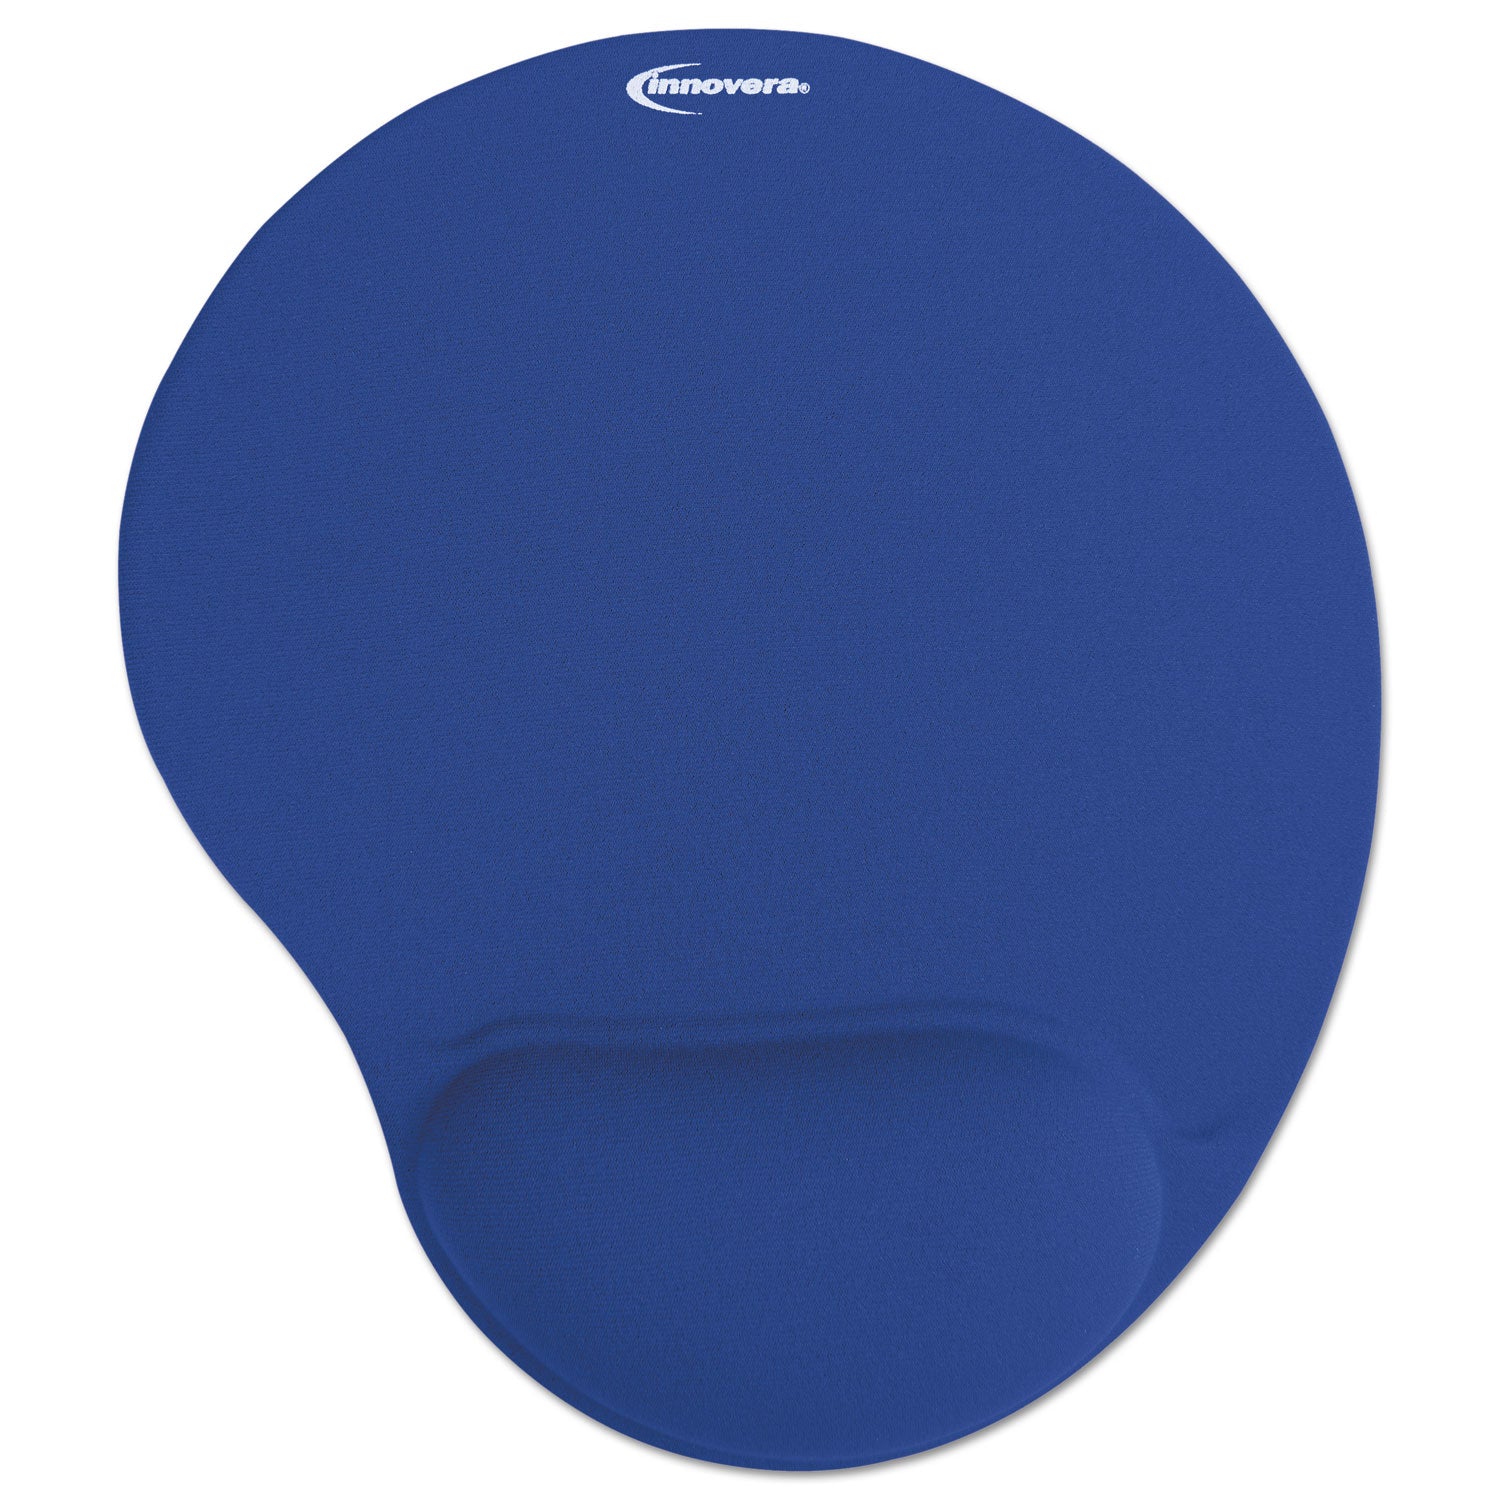 Mouse Pad with Fabric-Covered Gel Wrist Rest, 10.37 x 8.87, Blue - 